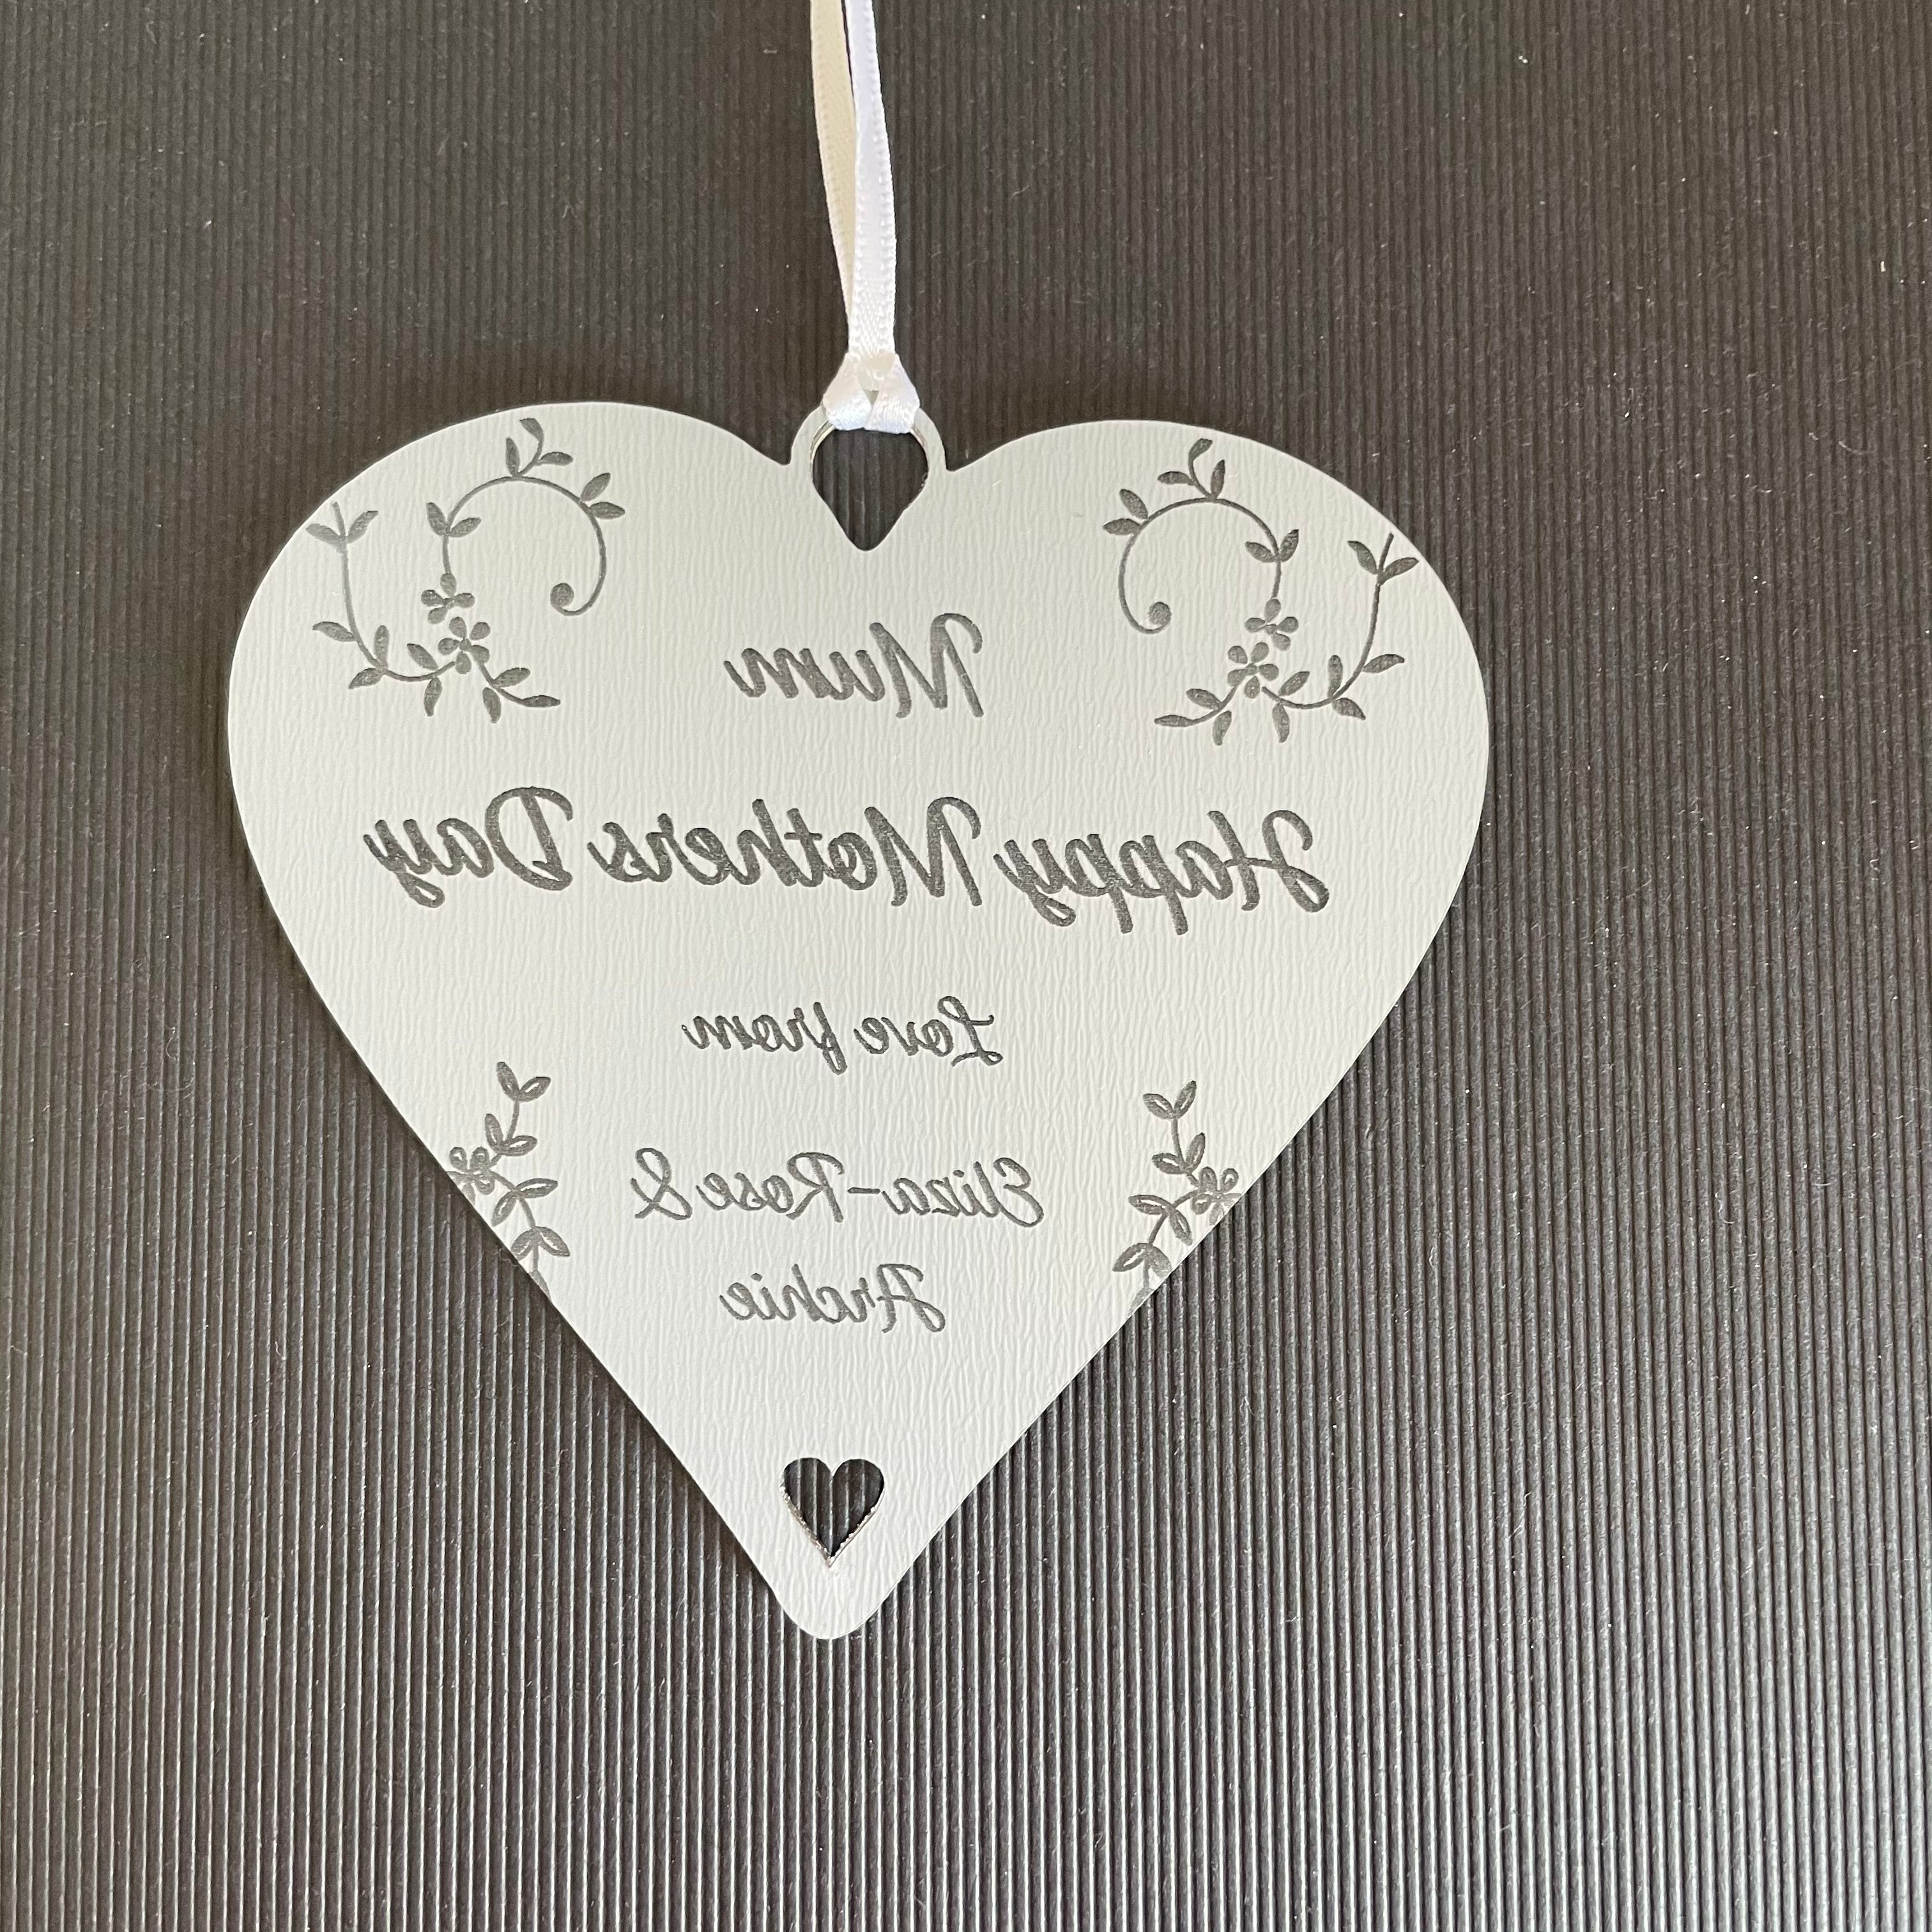 Personalised Gifts for Her Vine Flowers Plaque - 10cm Heart